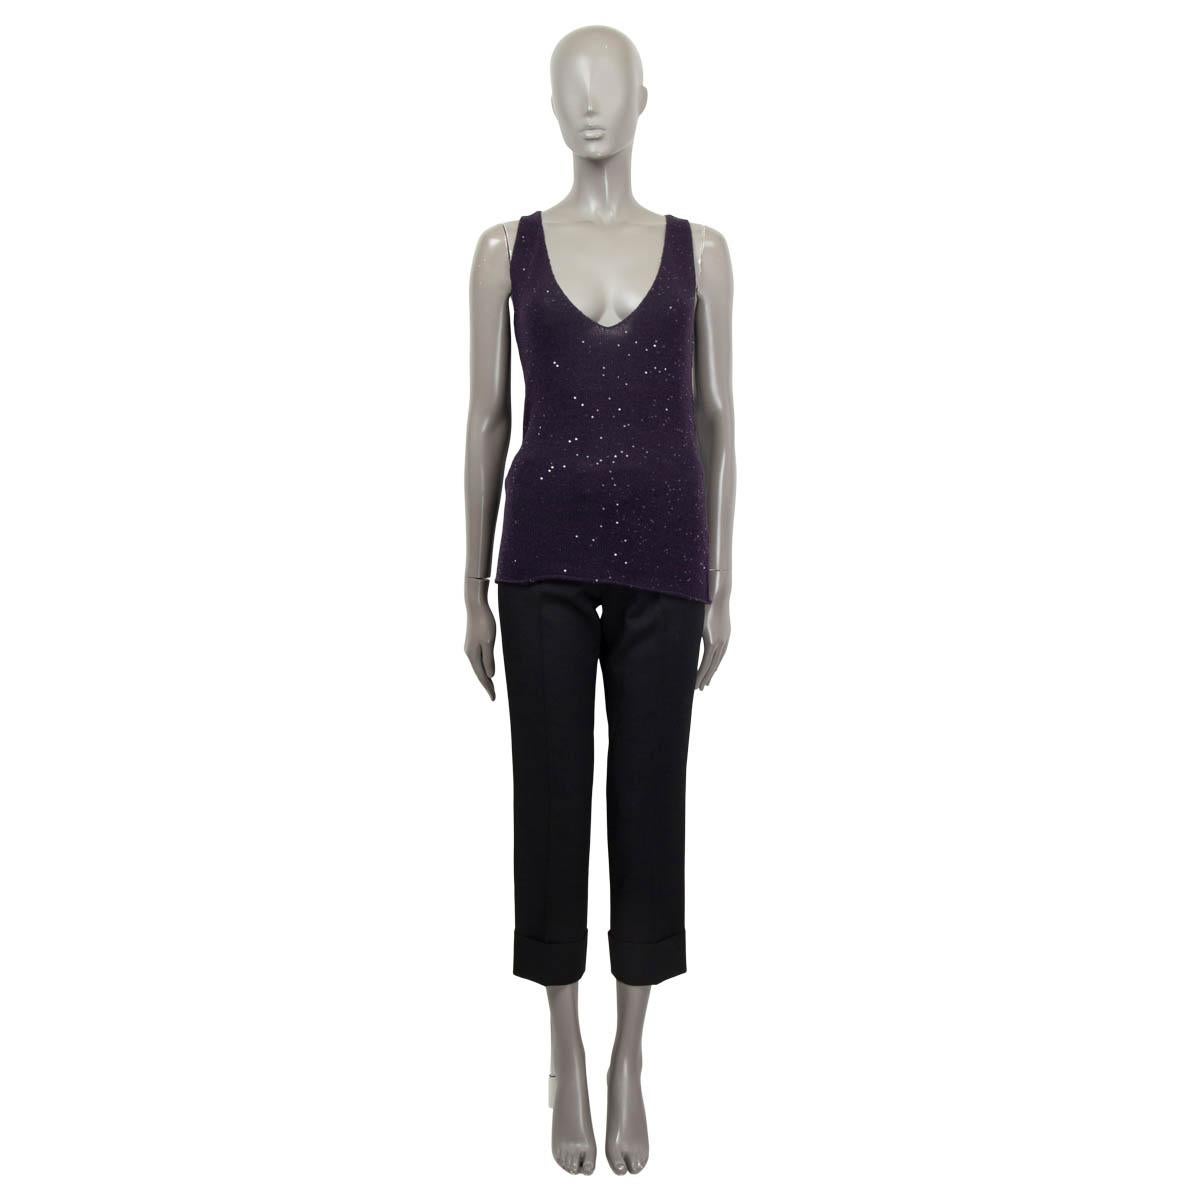 100% authentic Loro Piana sequin embellished sleeveless knit top in purple cashmere (90%), cotton (7%) and polyester (3%). Has been worn and is in excellent condition. Matching cardigan available in separate listing. 

Measurements
Tag